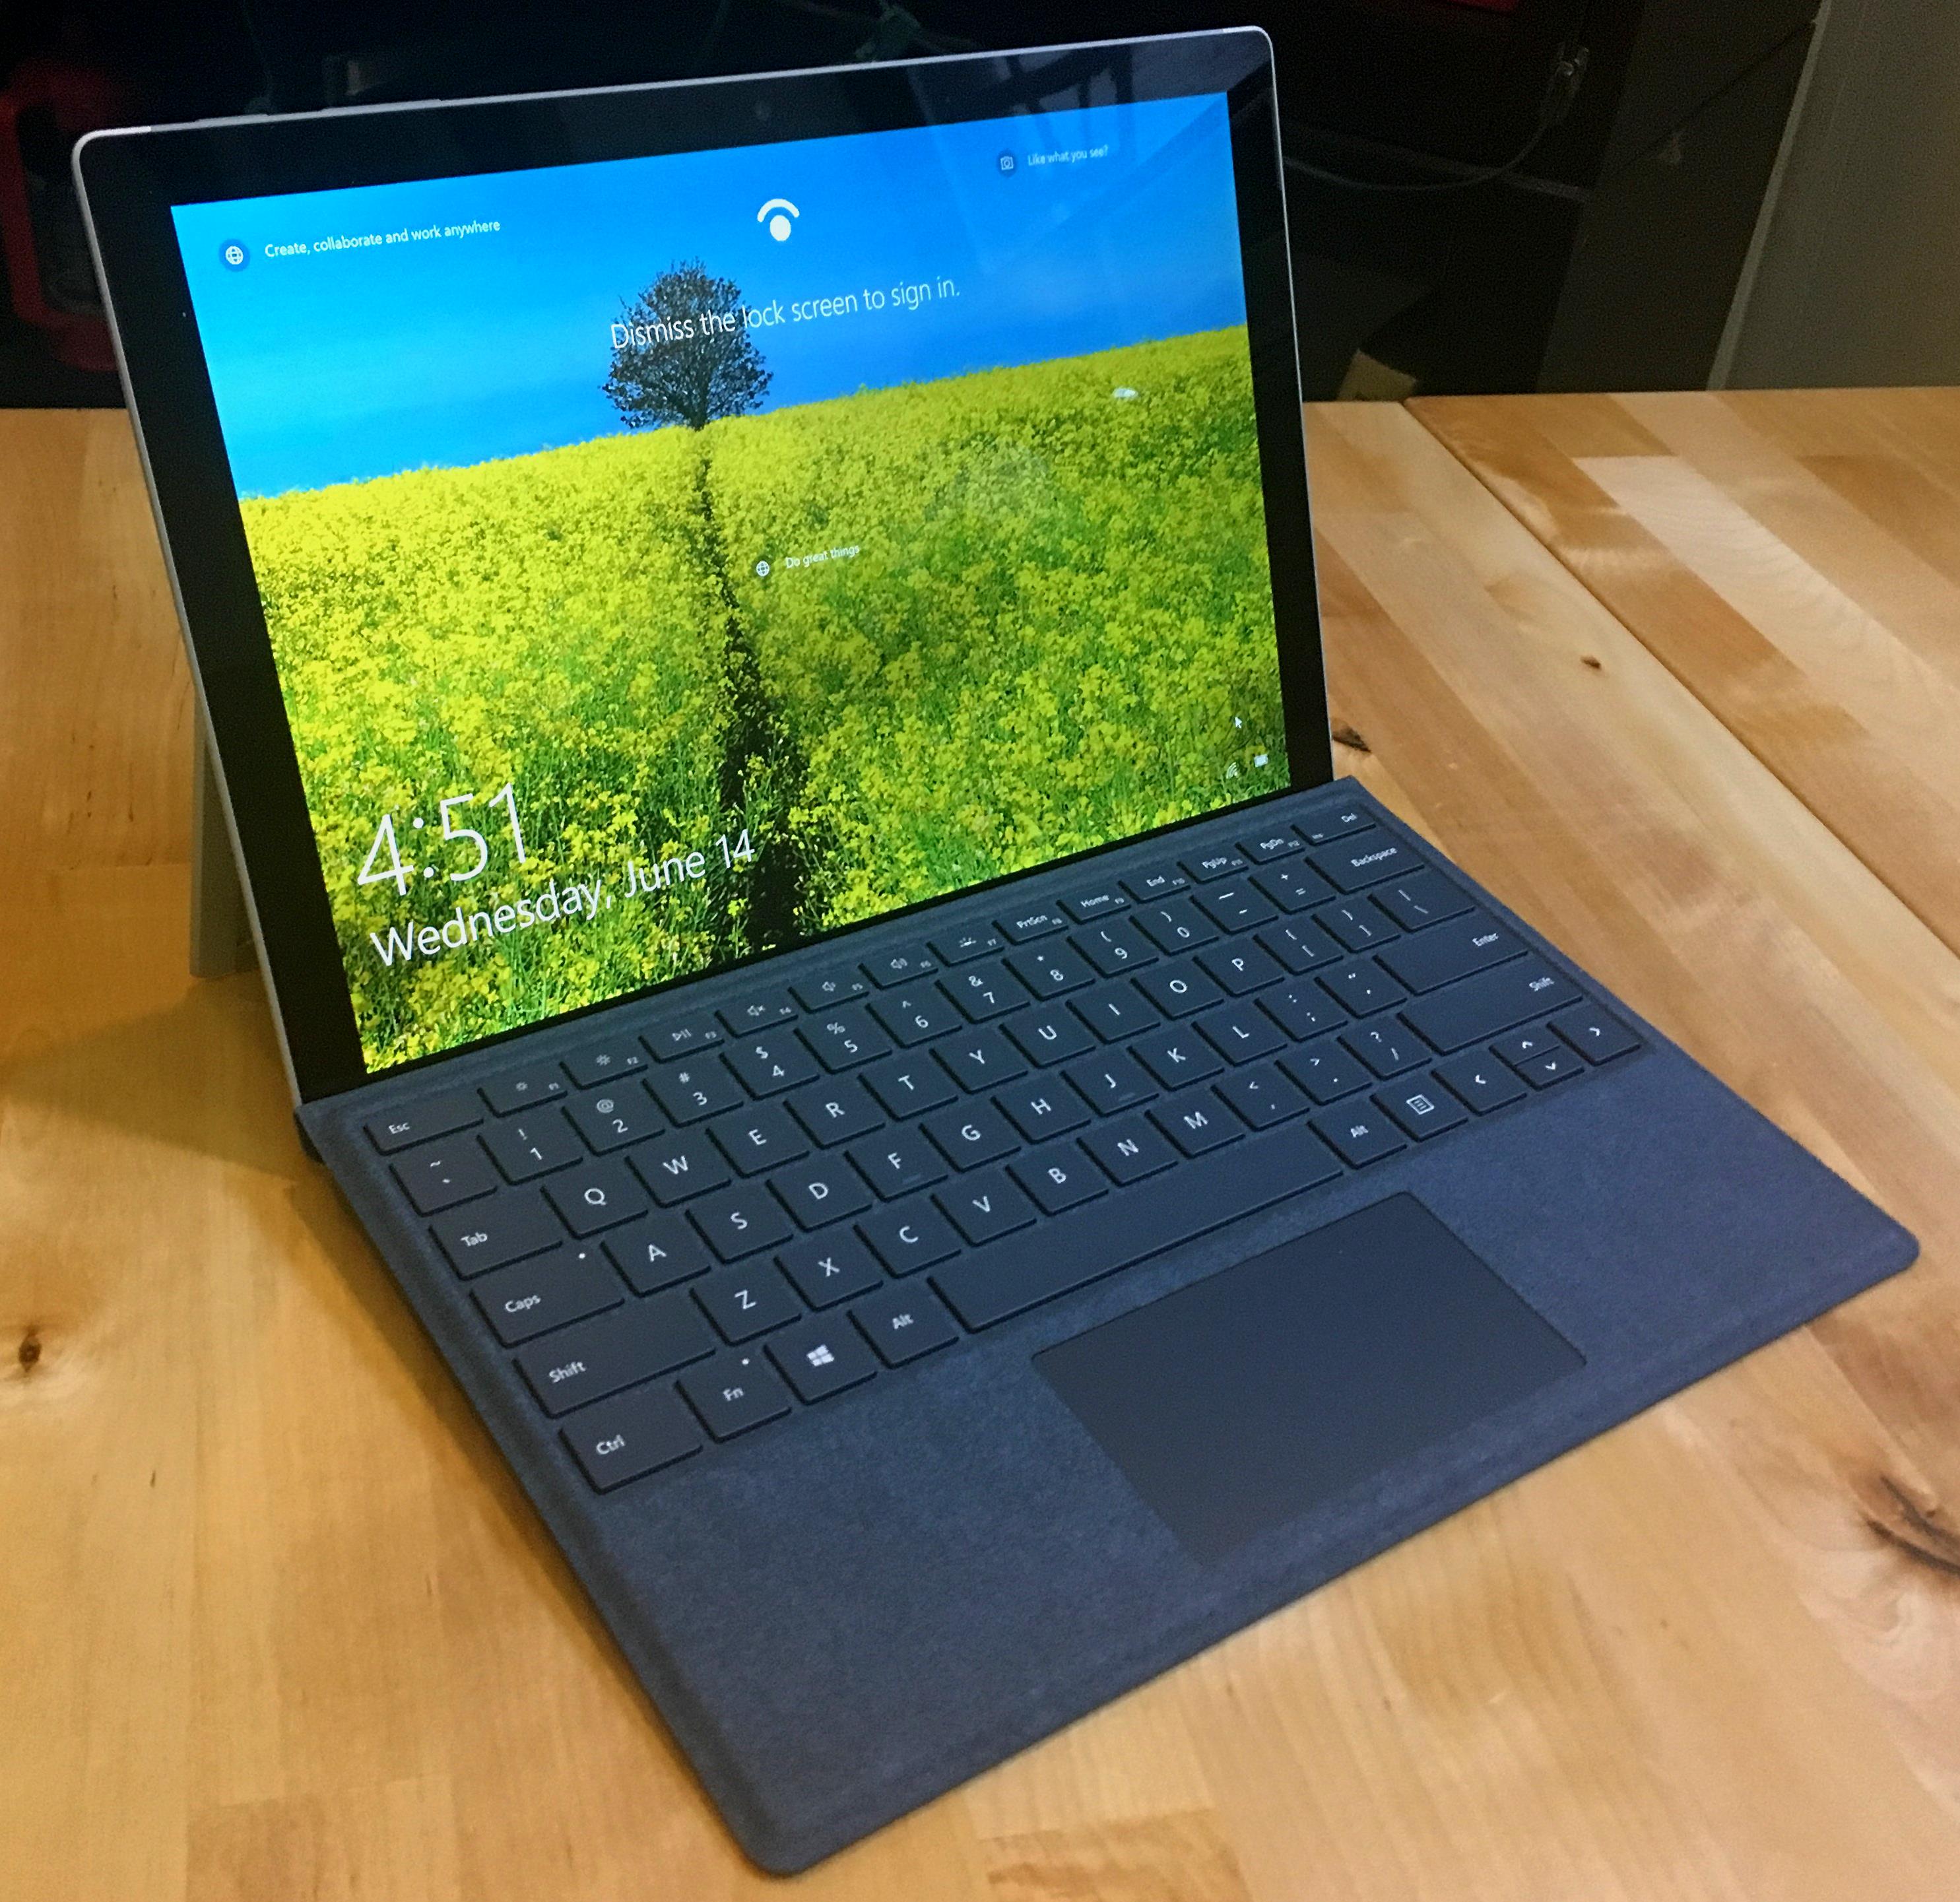 Microsoft seems to have leaked the Surface Pro LTE specs